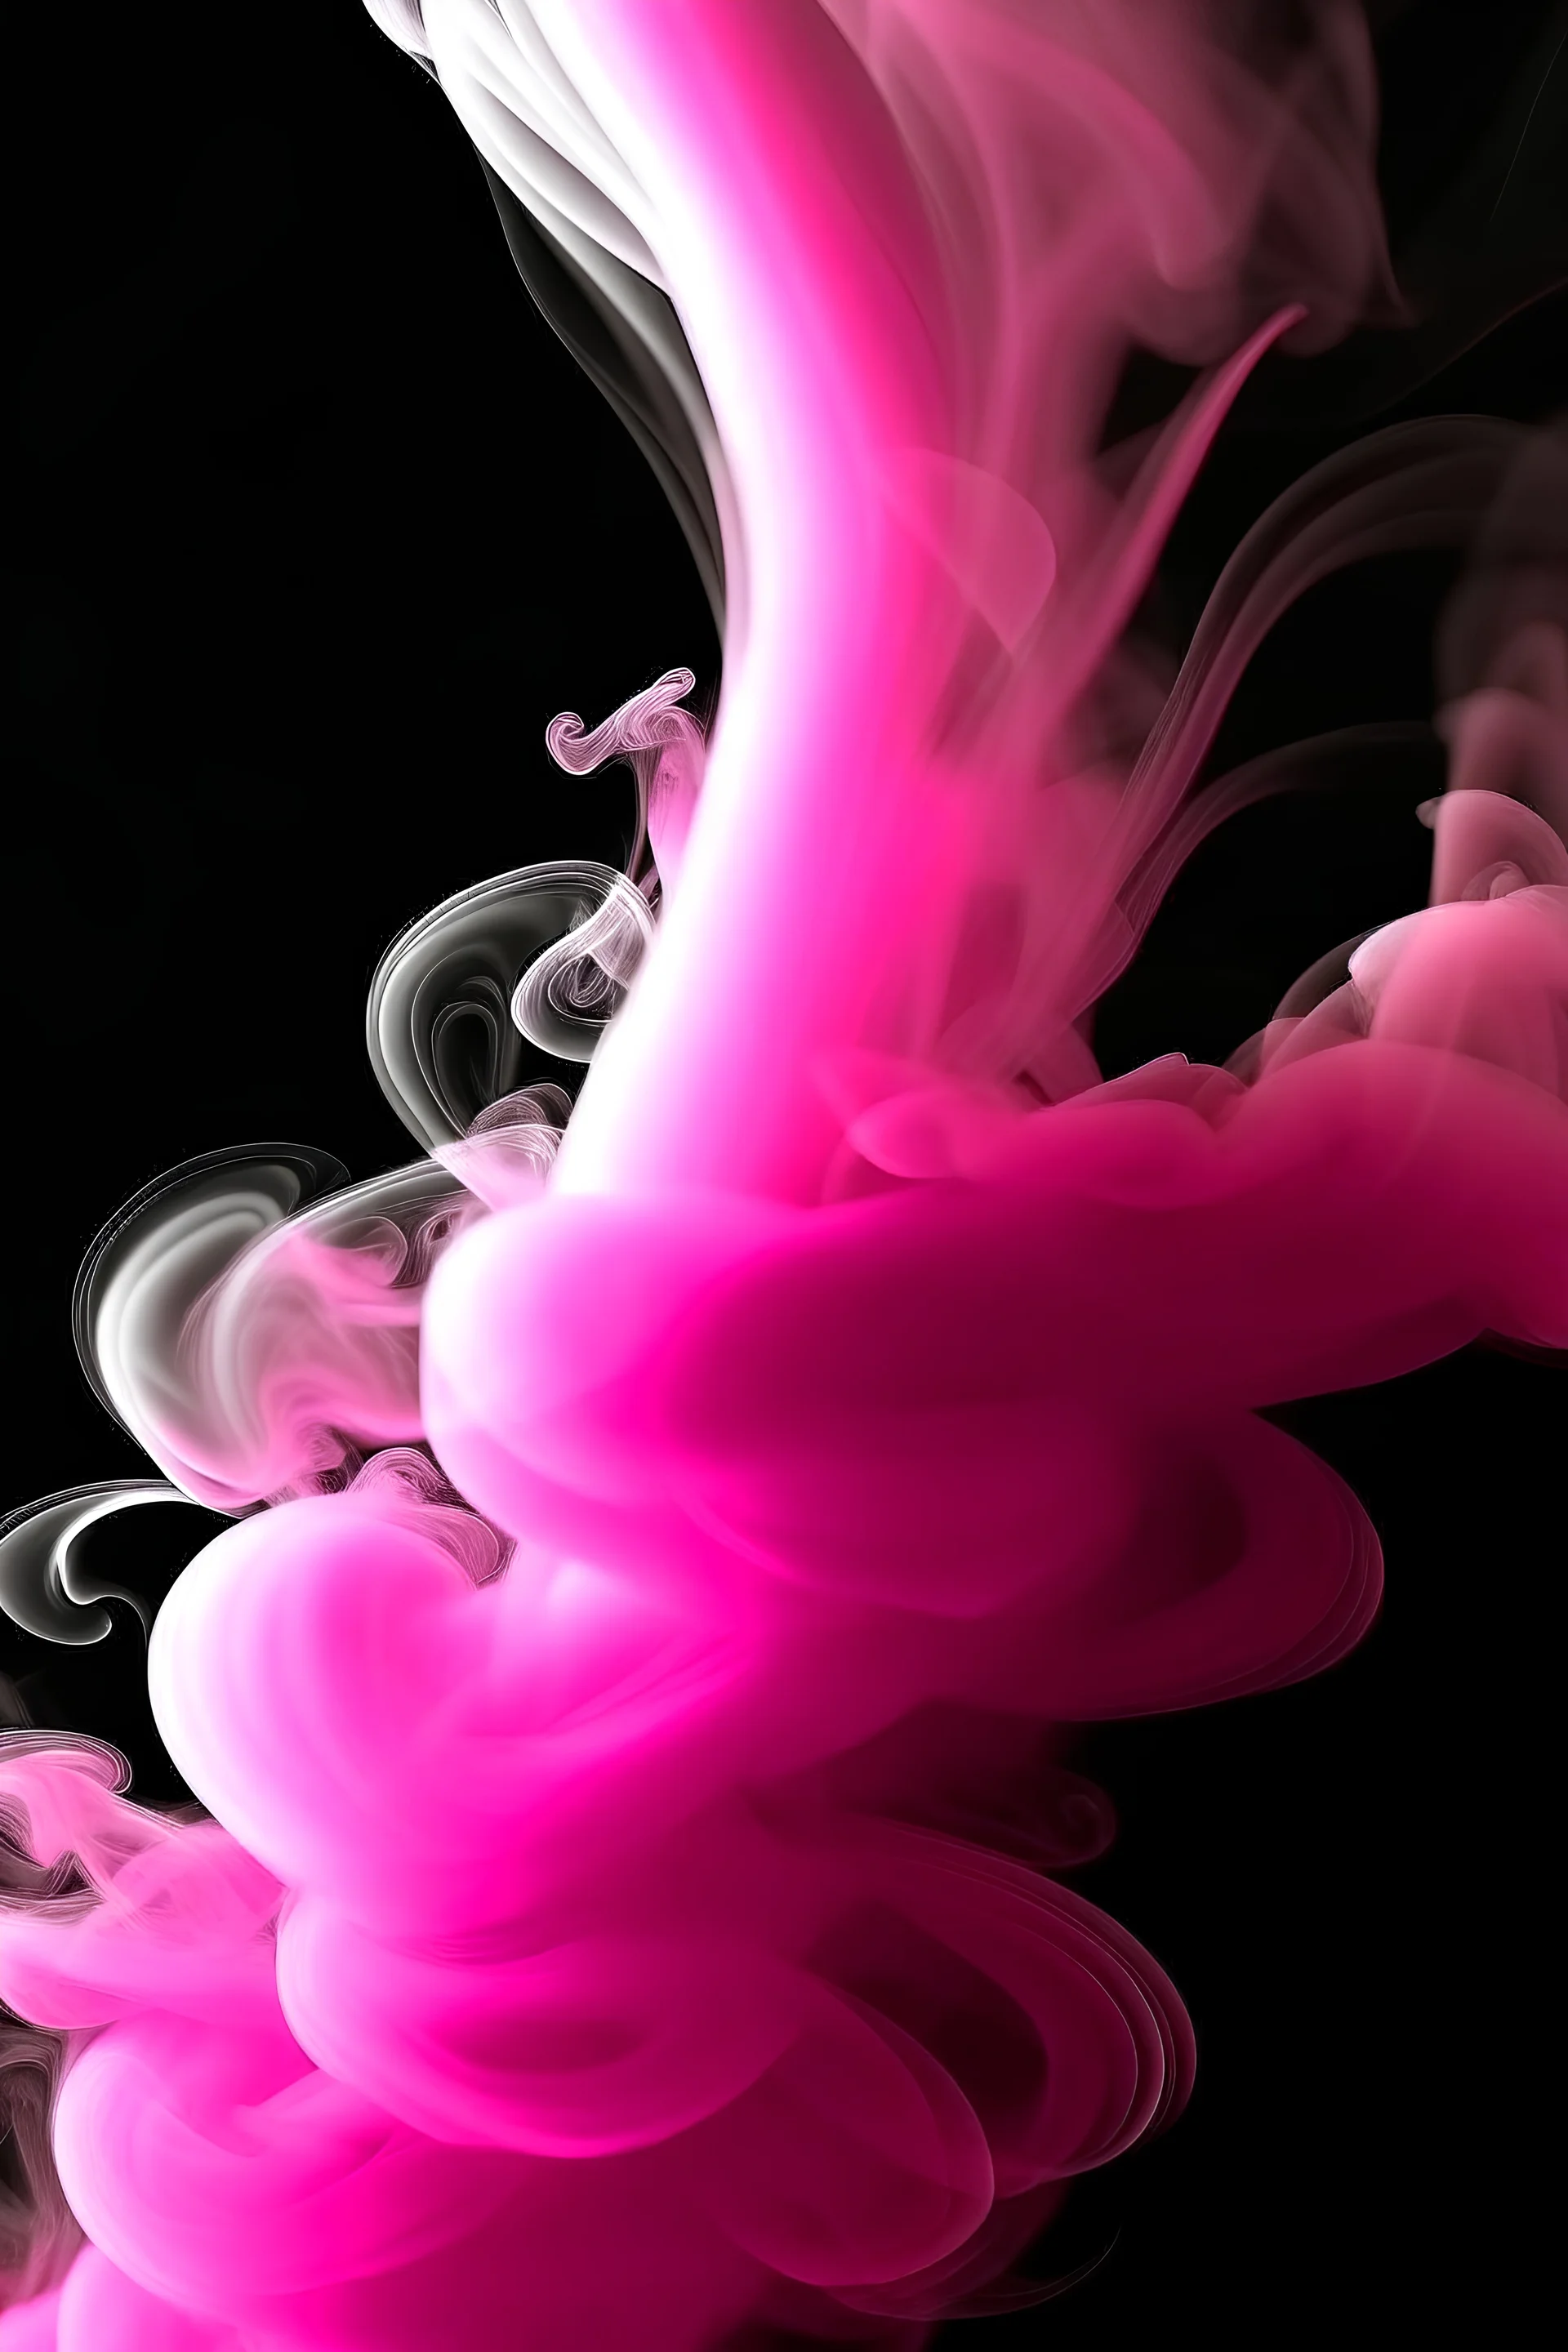 3D, add smoke with your pink, CHRISTIE,CHRISTIE,